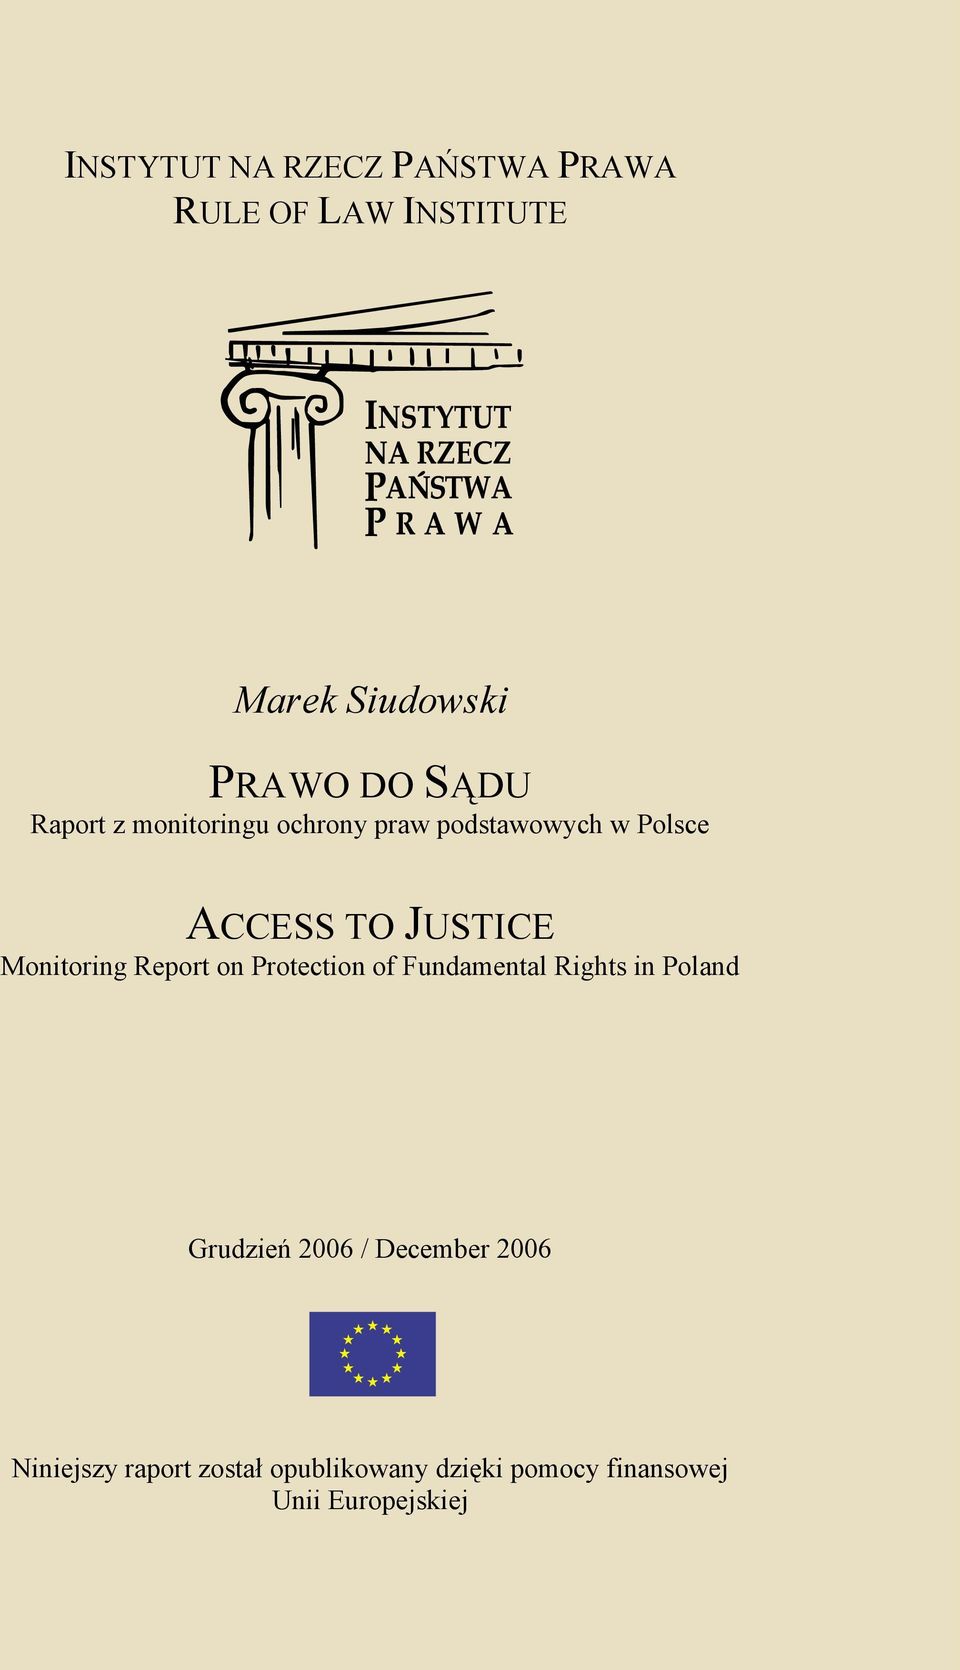 Monitoring Report on Protection of Fundamental Rights in Poland Grudzie 2006 /